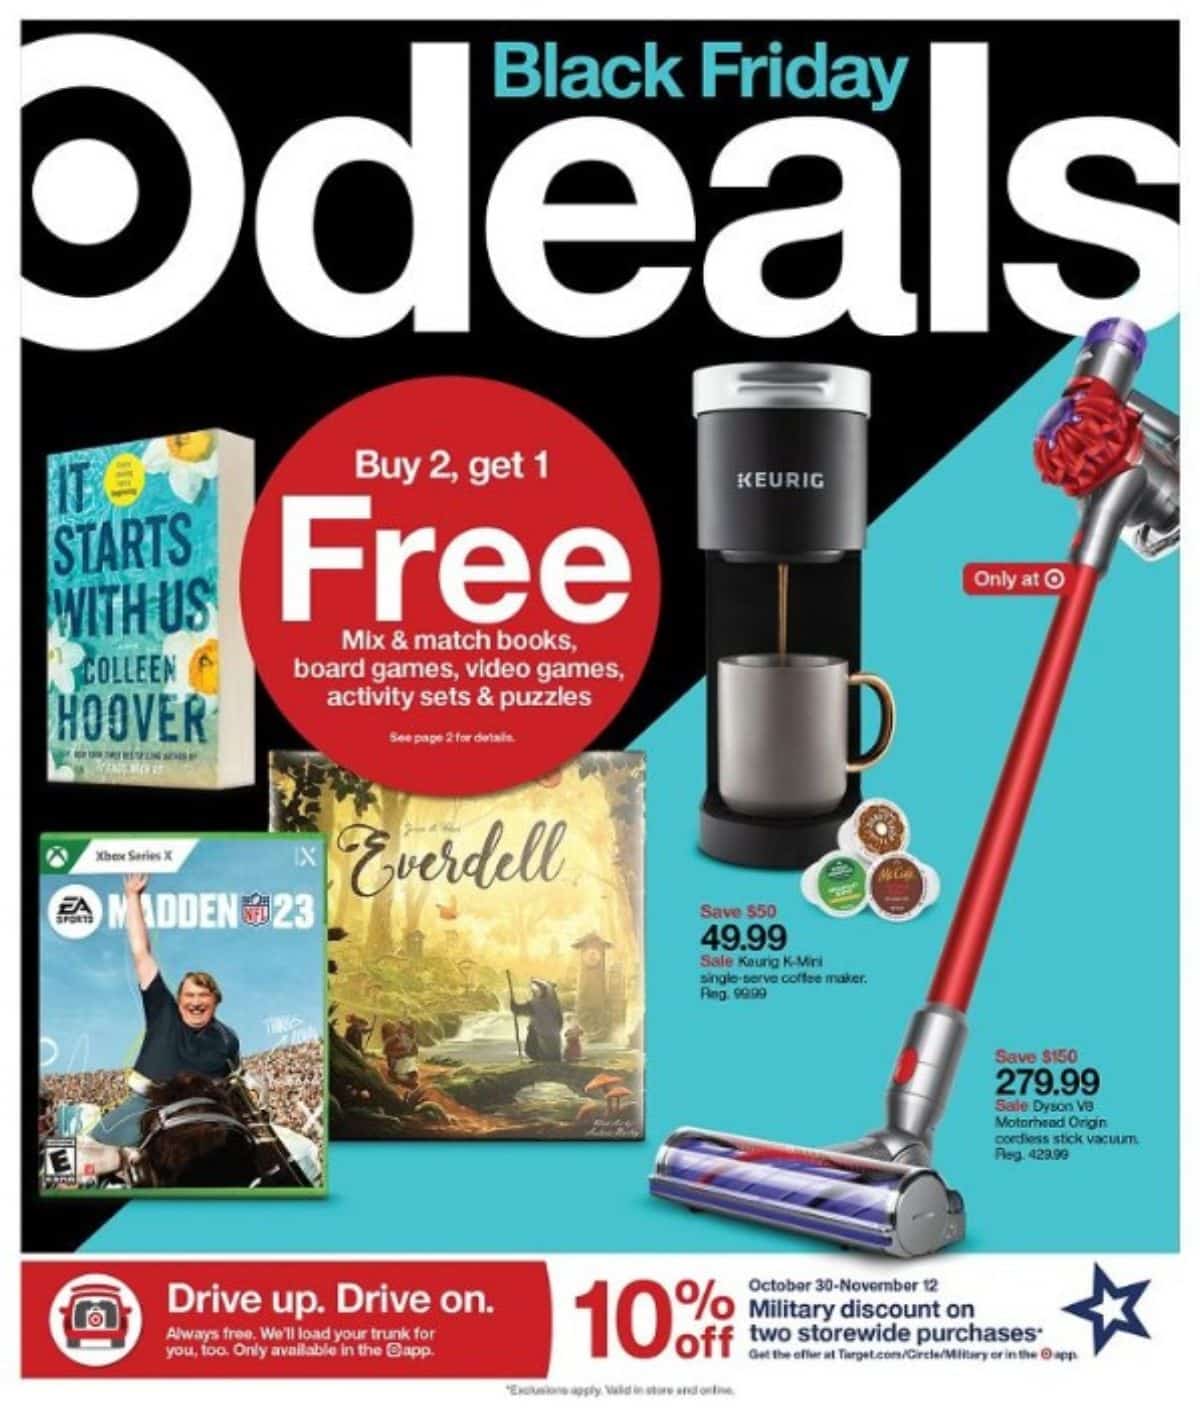 Target Black Friday Deals Available Now - My Frugal Adventures